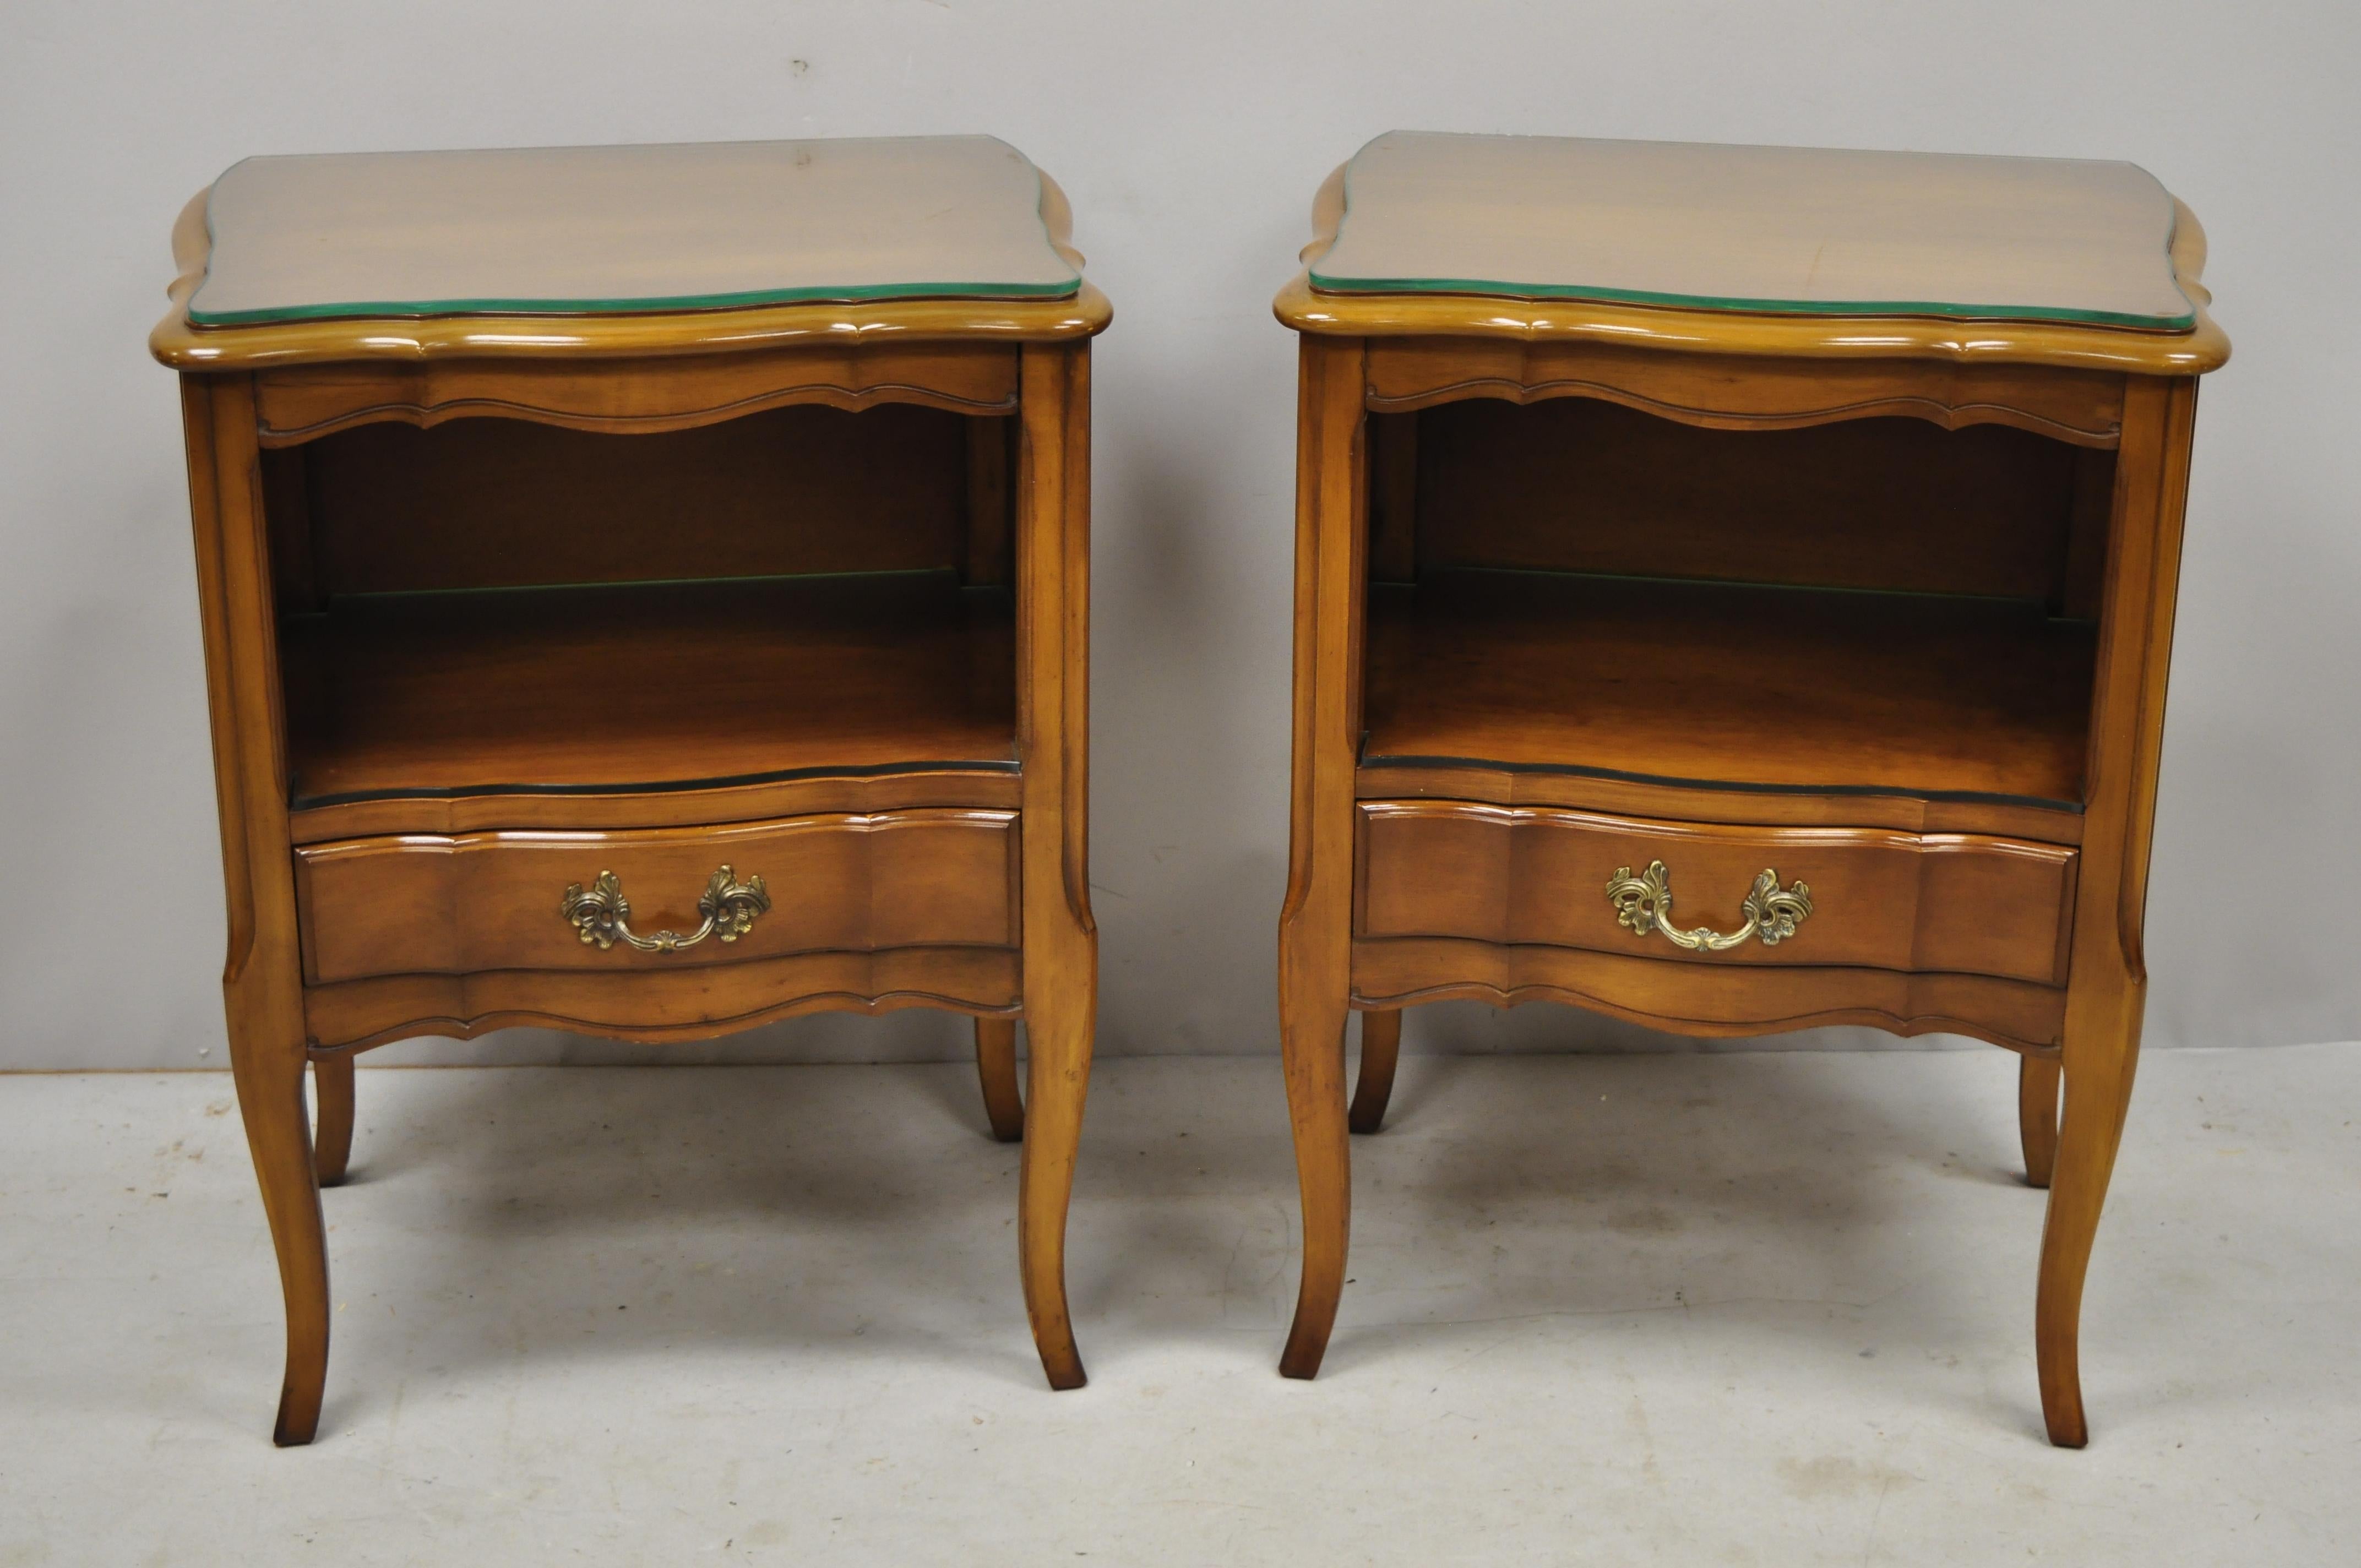 Pair of vintage cherrywood French Provincial nightstand bedside tables by White Furniture. Listing includes custom glass to the interior shelf and top, solid wood construction, beautiful wood grain, original stamp, 1 dovetailed drawer, cabriole